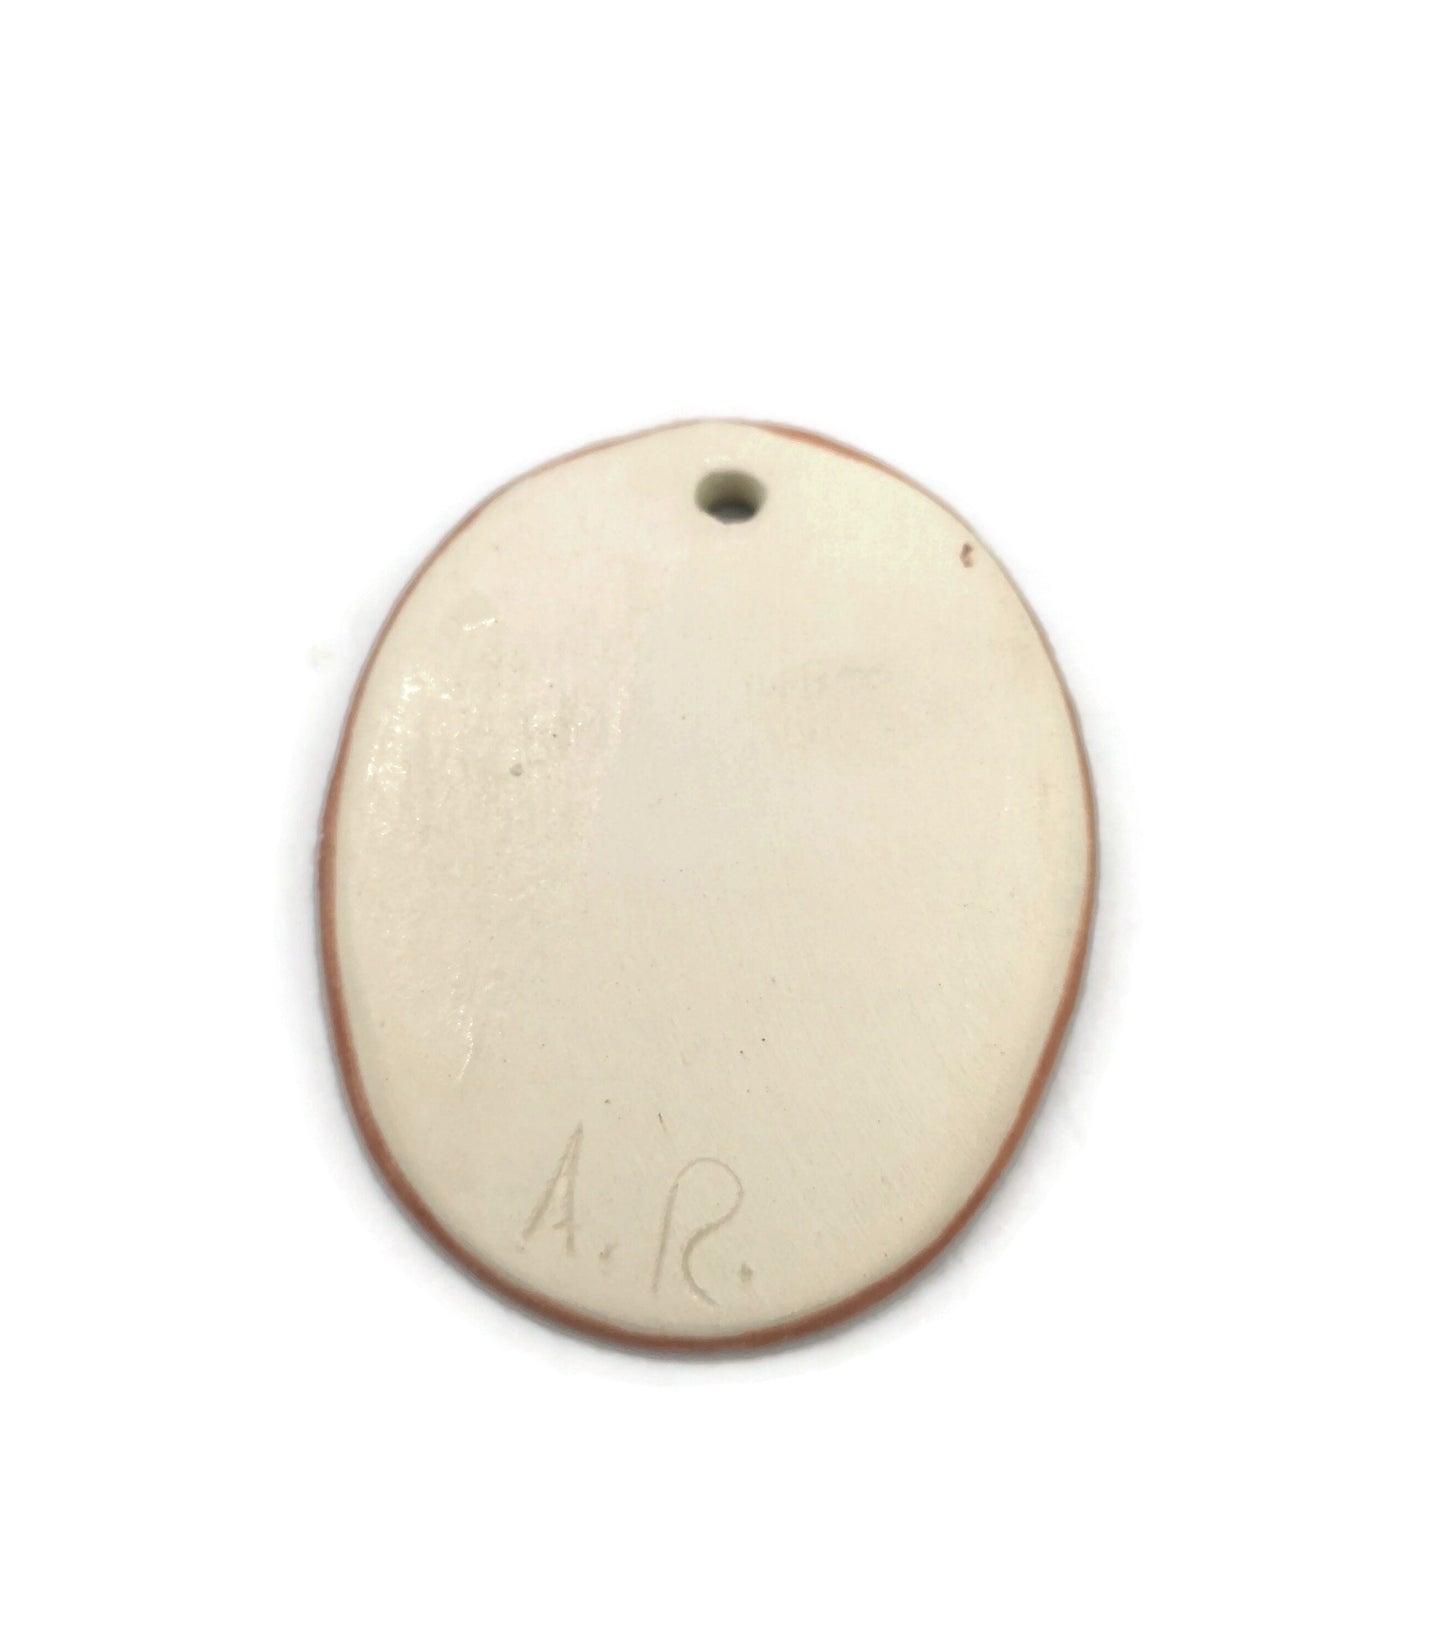 virgo pendant for necklace, large zodiac pendant, ceramic pendant for jewelry making supplies, DIY gift for mom, oval pendant no chain, best - Ceramica Ana Rafael